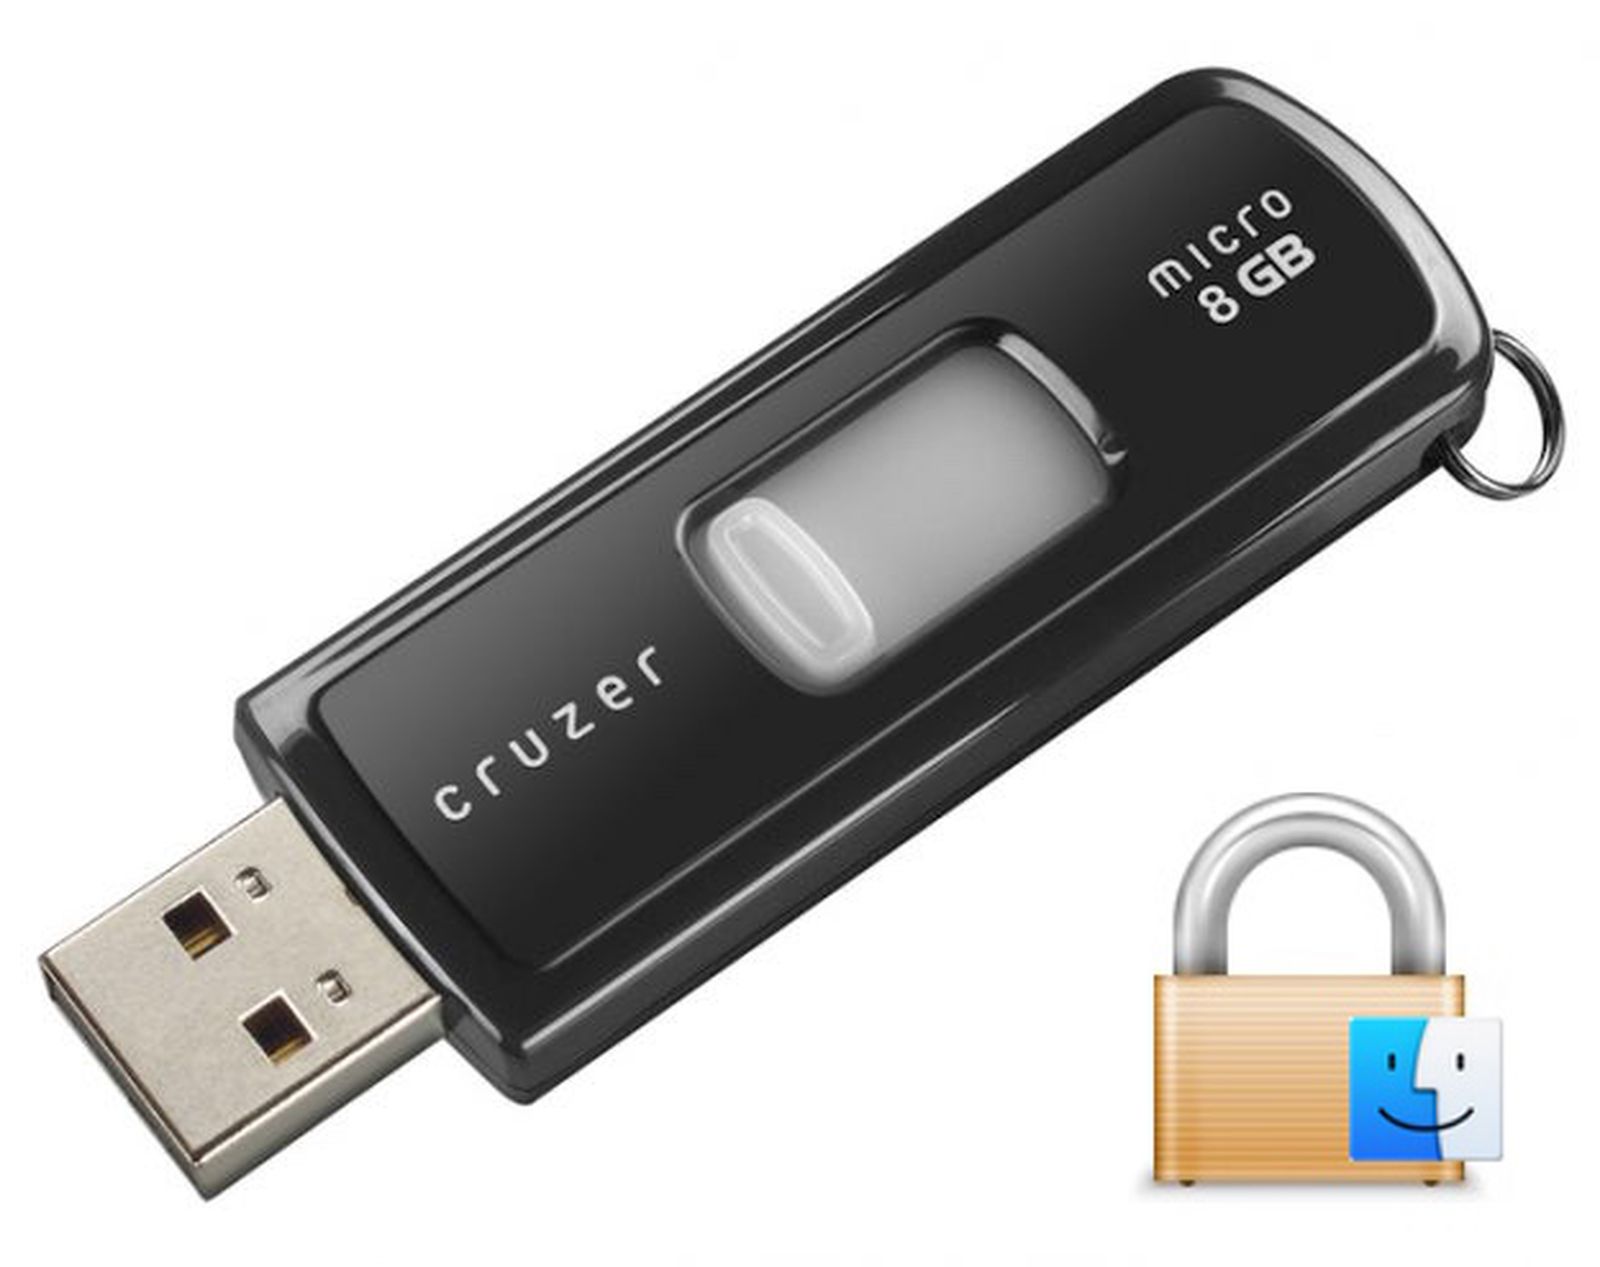 reformat my sandisk 64gb usb and encryption for mac